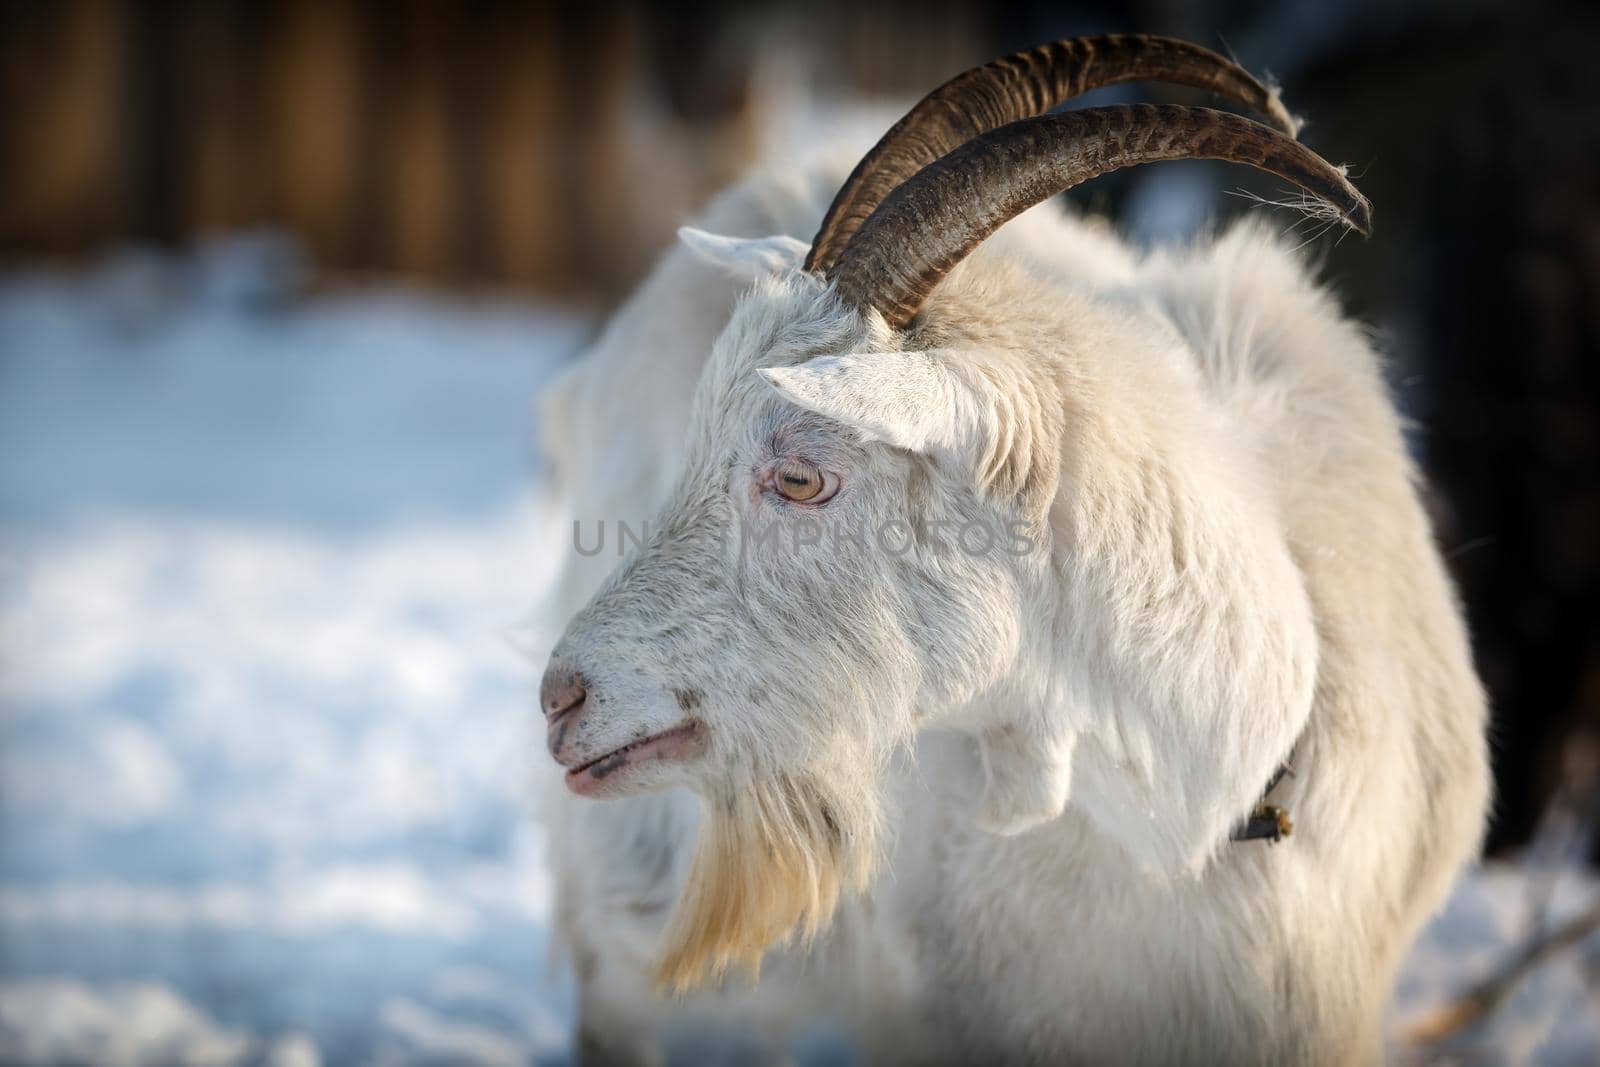 Goat in winter snow scene with long horns looking to distance